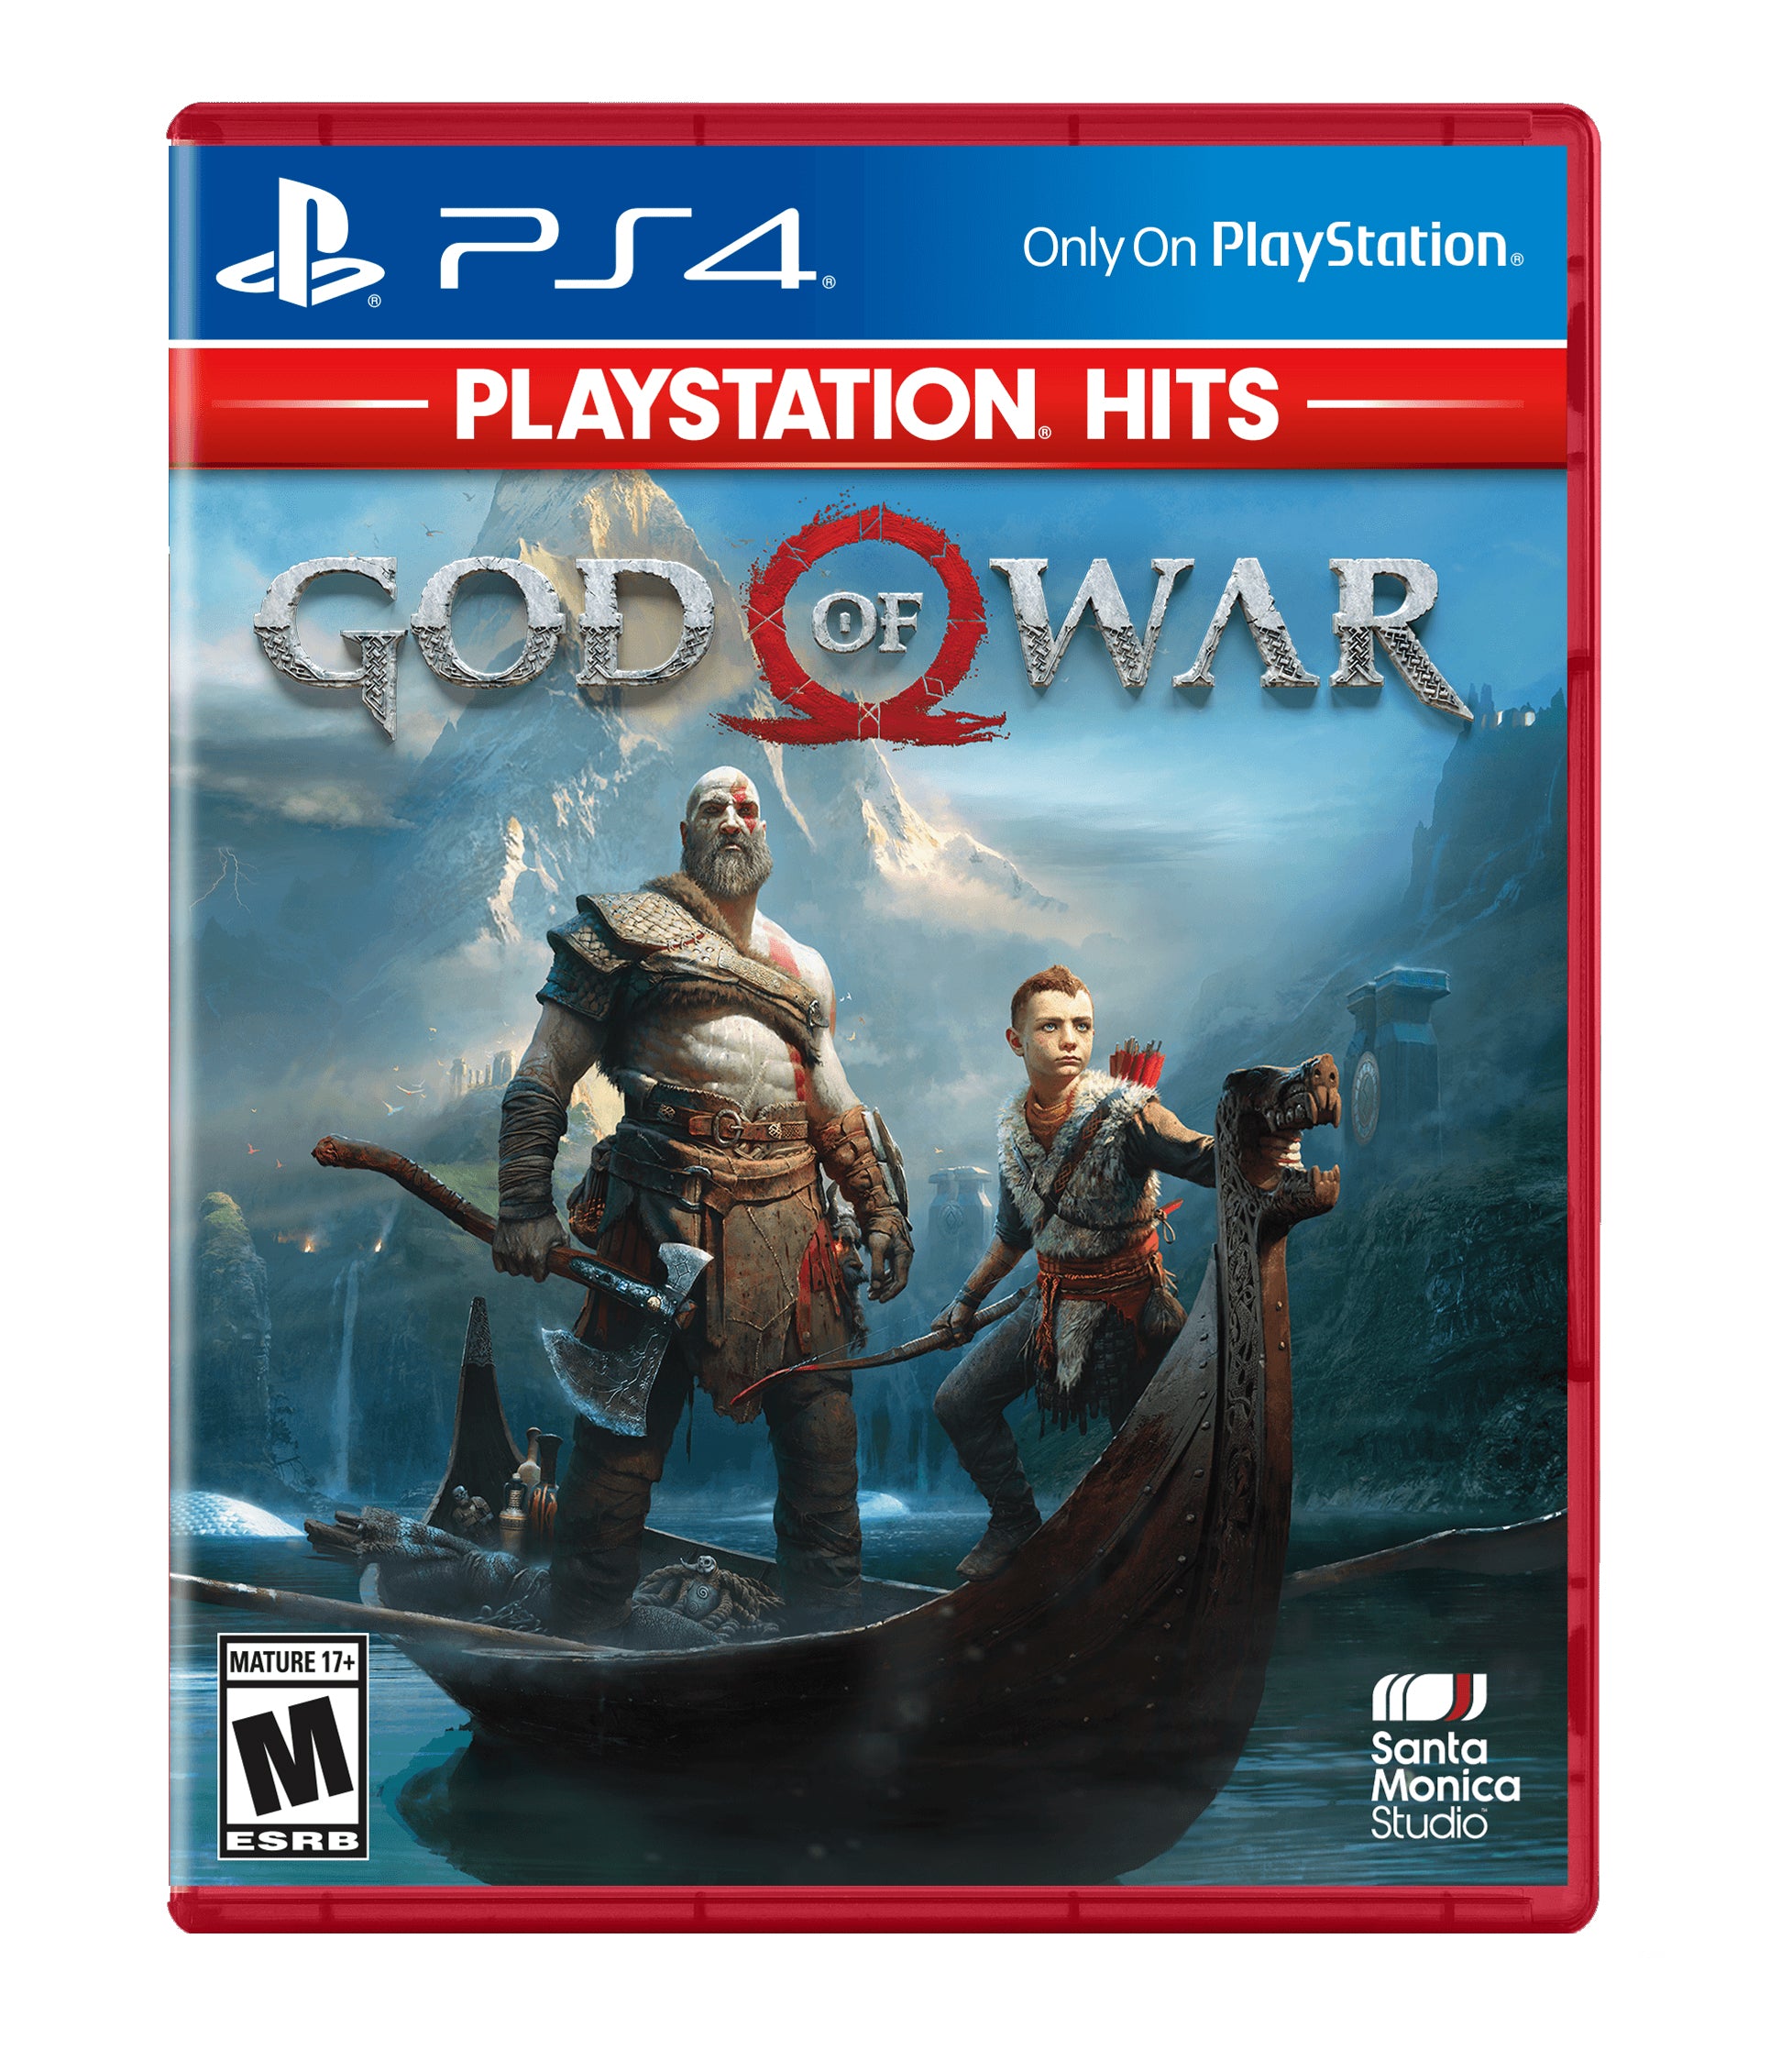 Sony PlayStation 4 Slim God of War PlayStation Hits Bundle Upgrade 2TB SSD PS4 Gaming Console, Jet Black, with Mytrix Chat Headset - 2TB Internal Fast Solid State Drive Enhanced PS4 Console